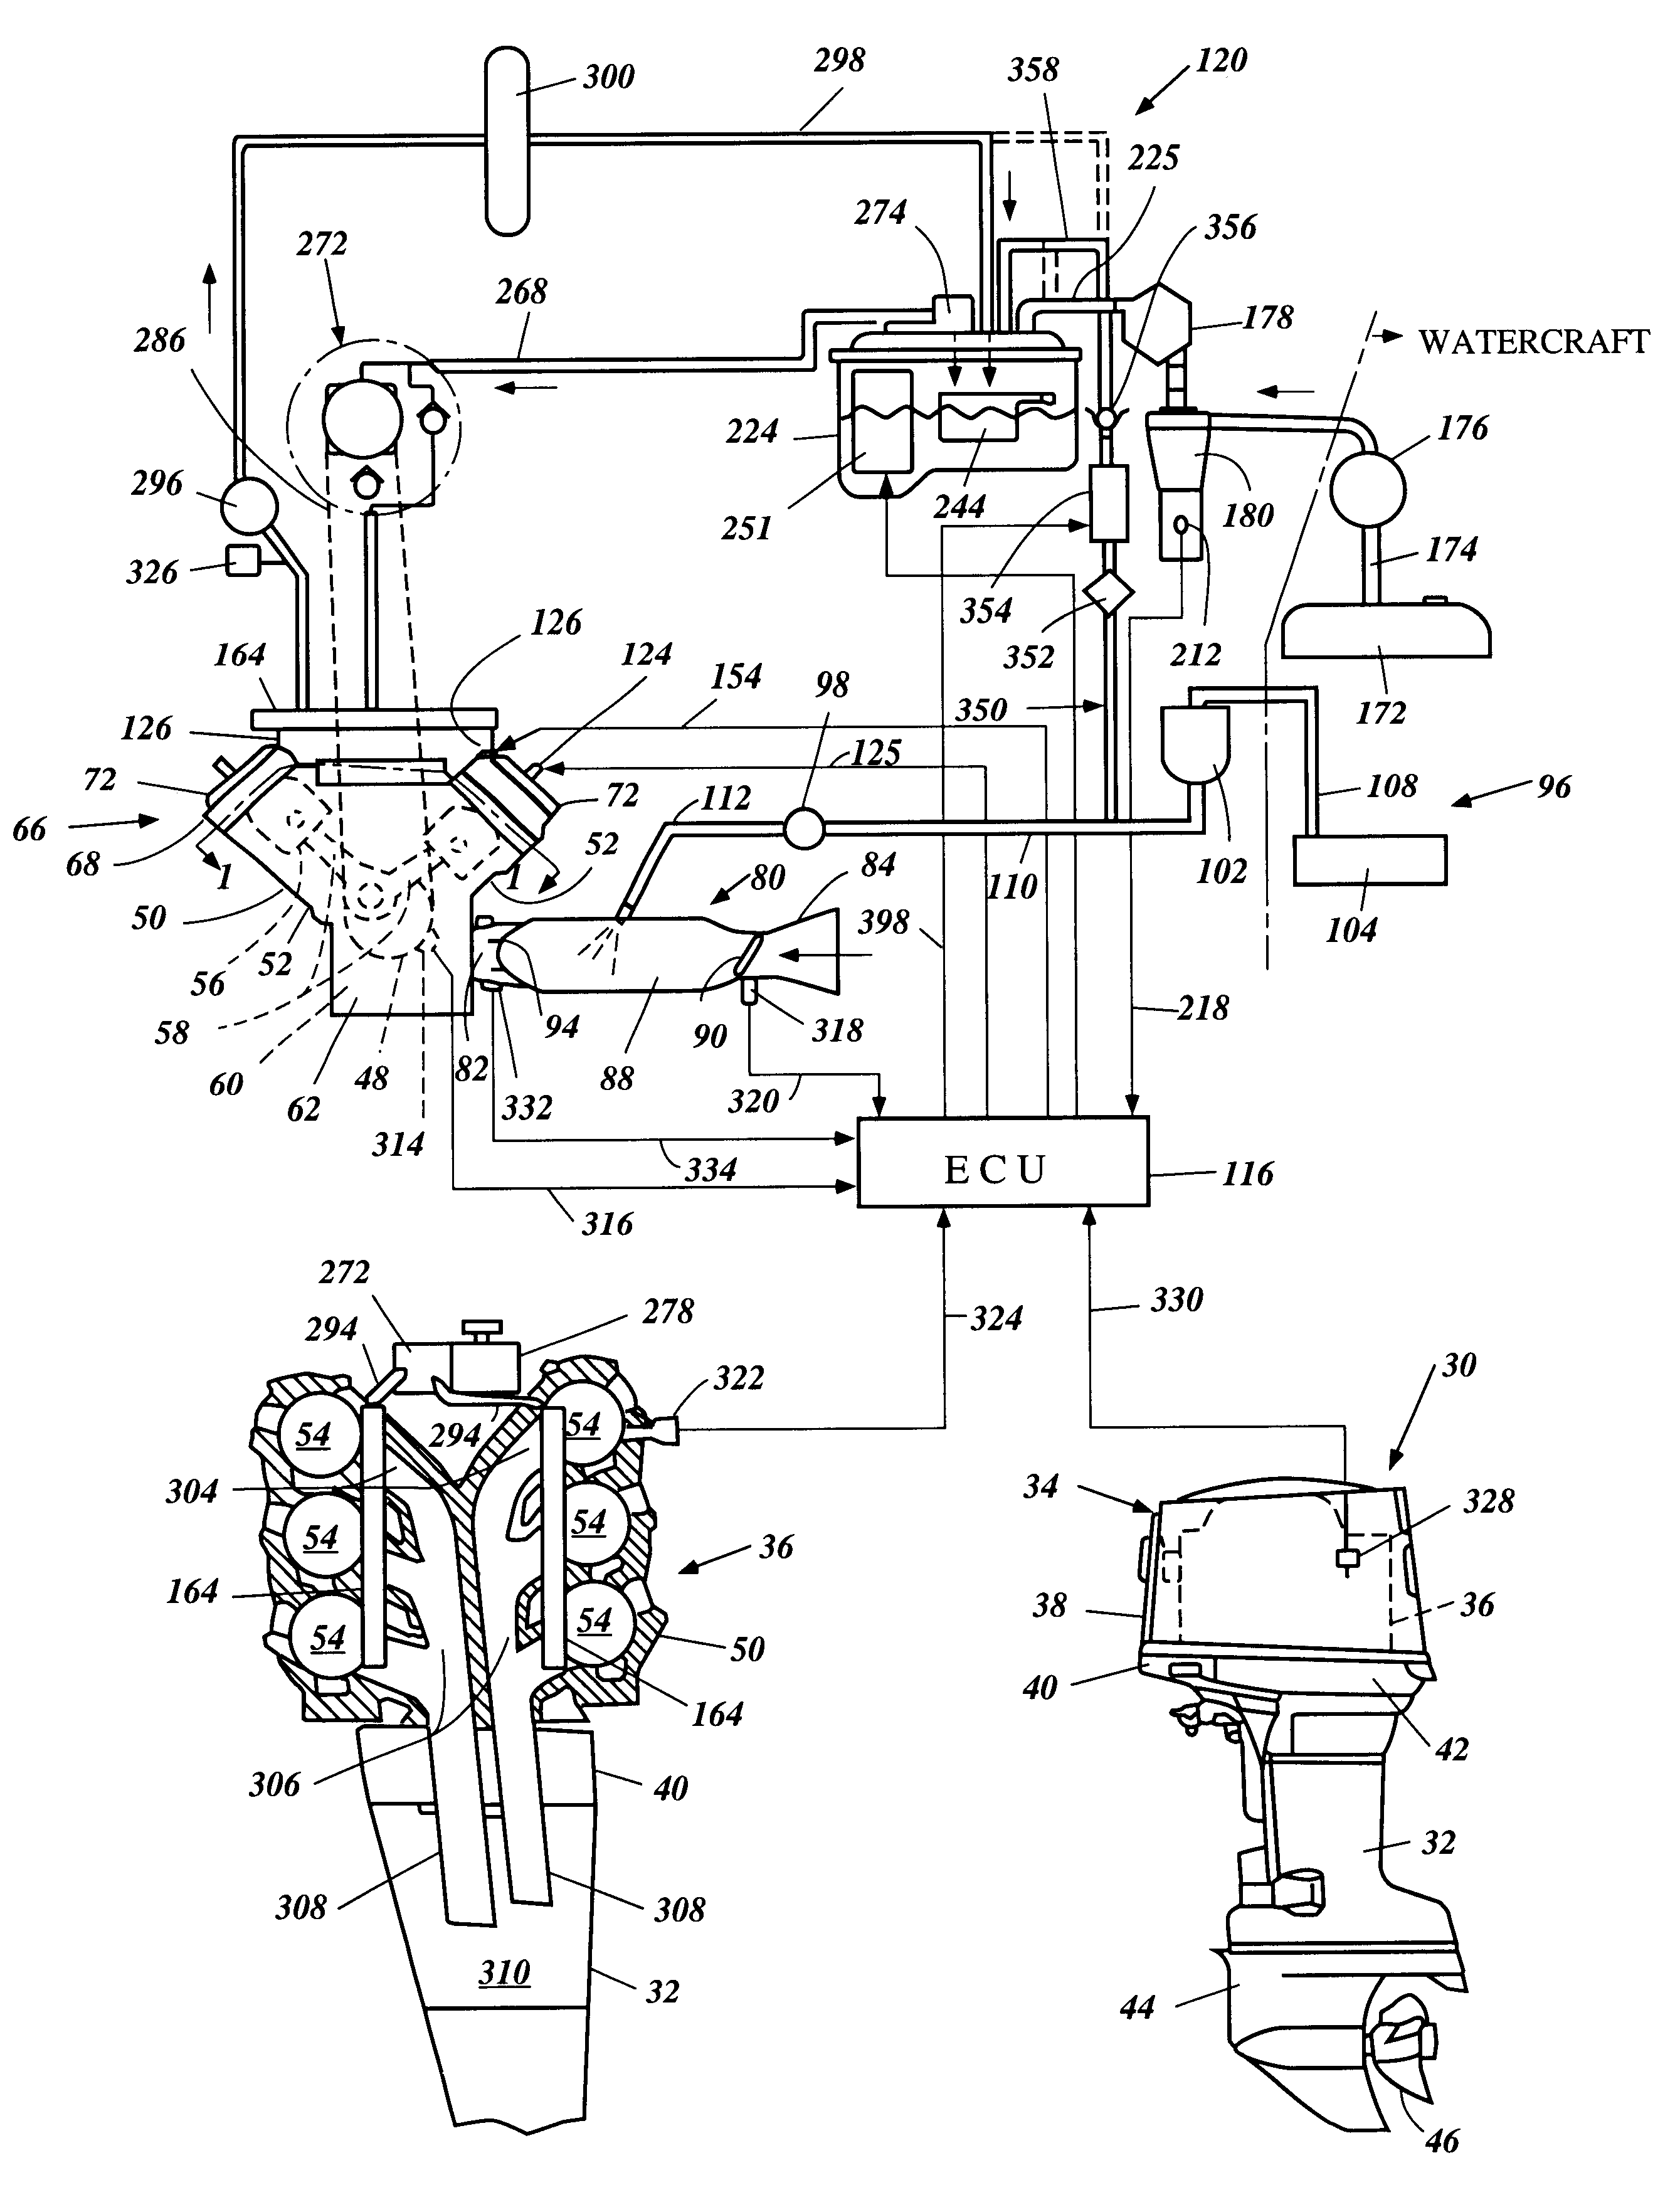 Fuel injection system for marine engine